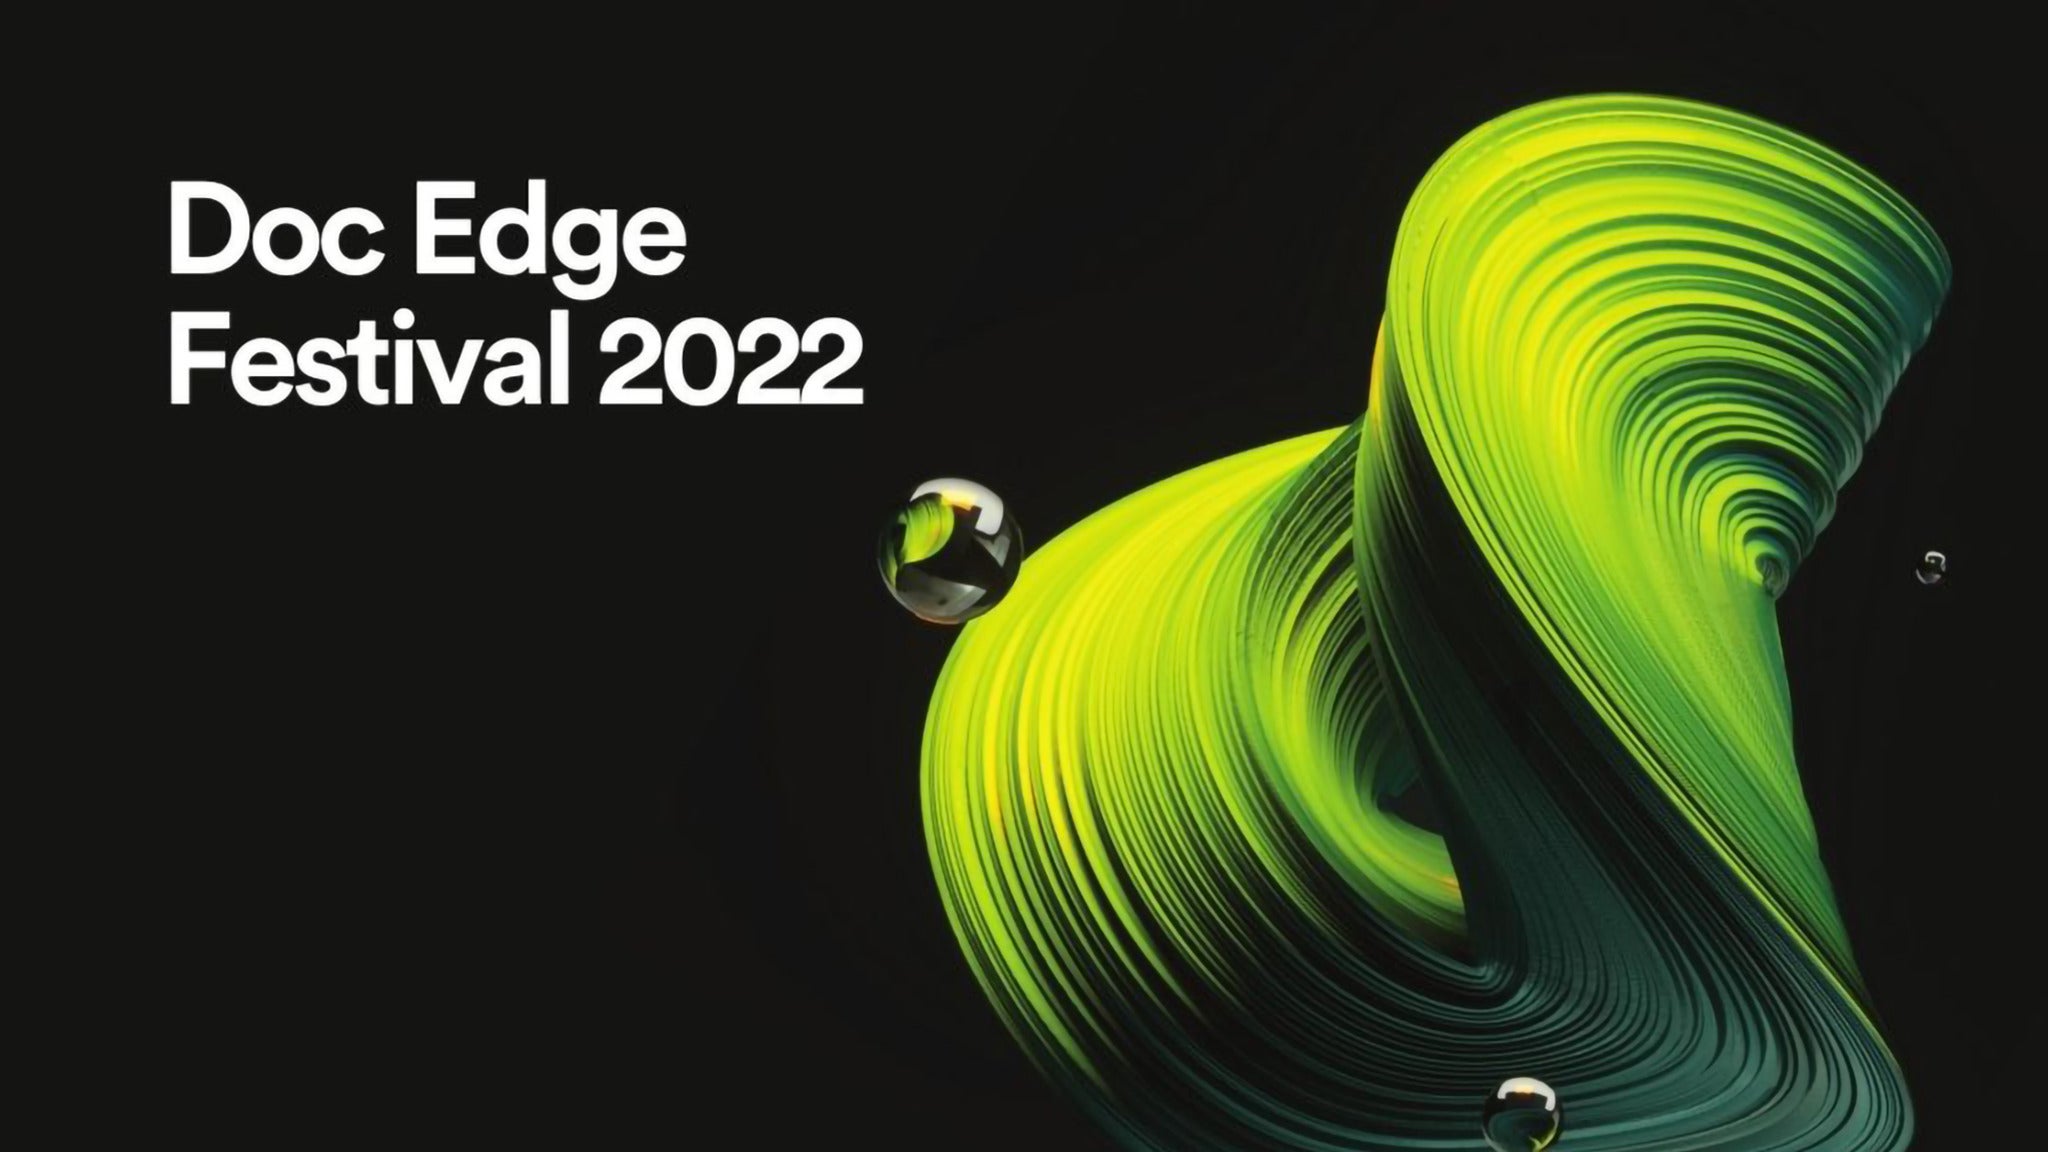 Image used with permission from Ticketmaster | Doc Edge Film Festival 2022: Going Circular tickets